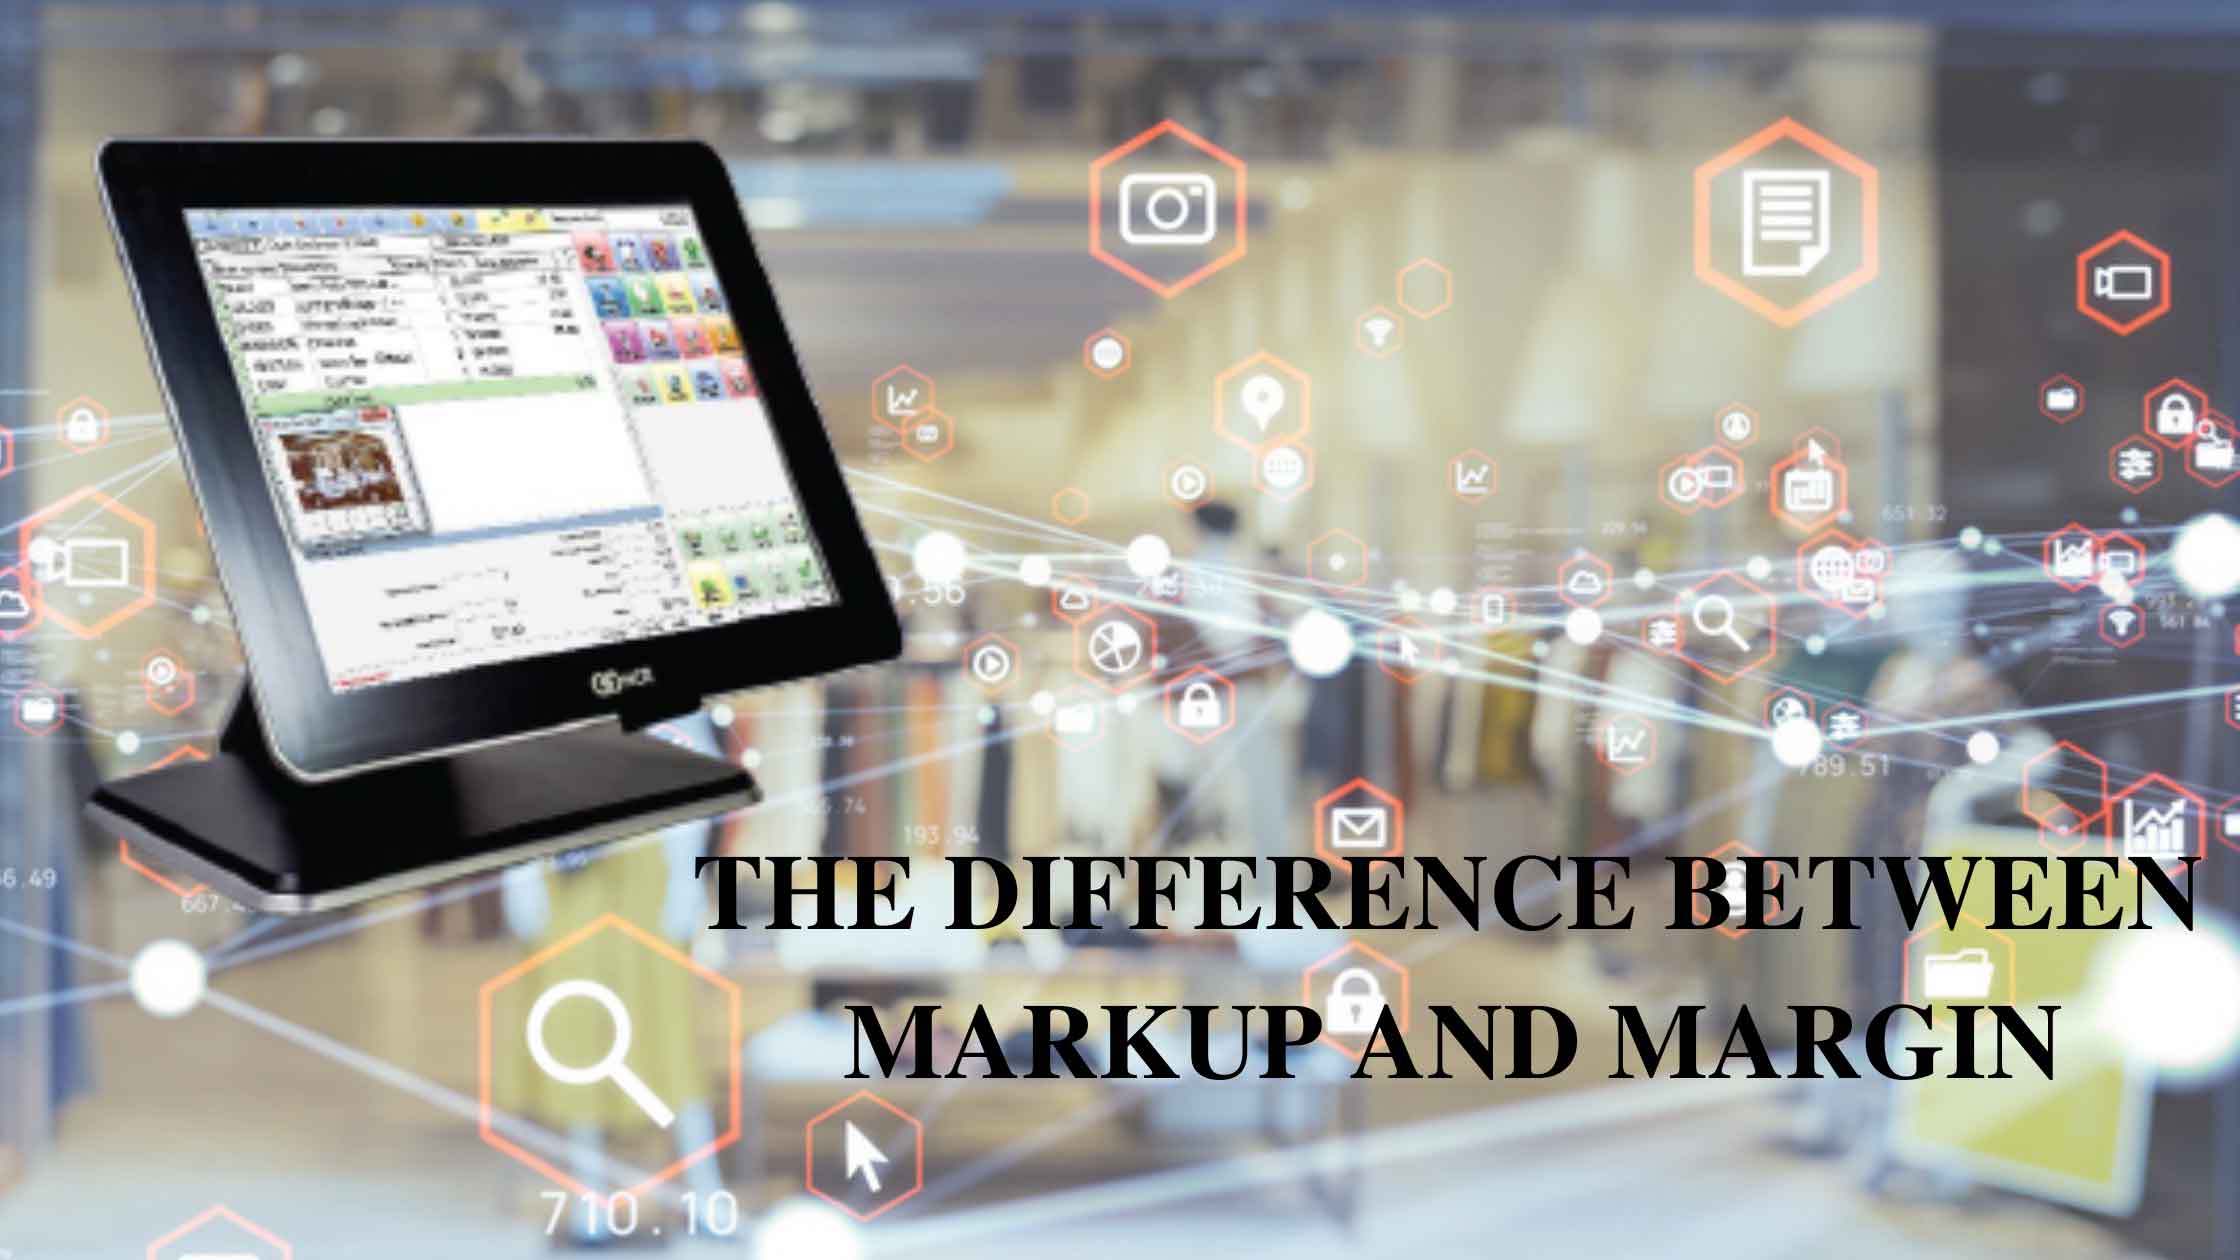 THE DIFFERENCE BETWEEN MARKUP AND MARGIN